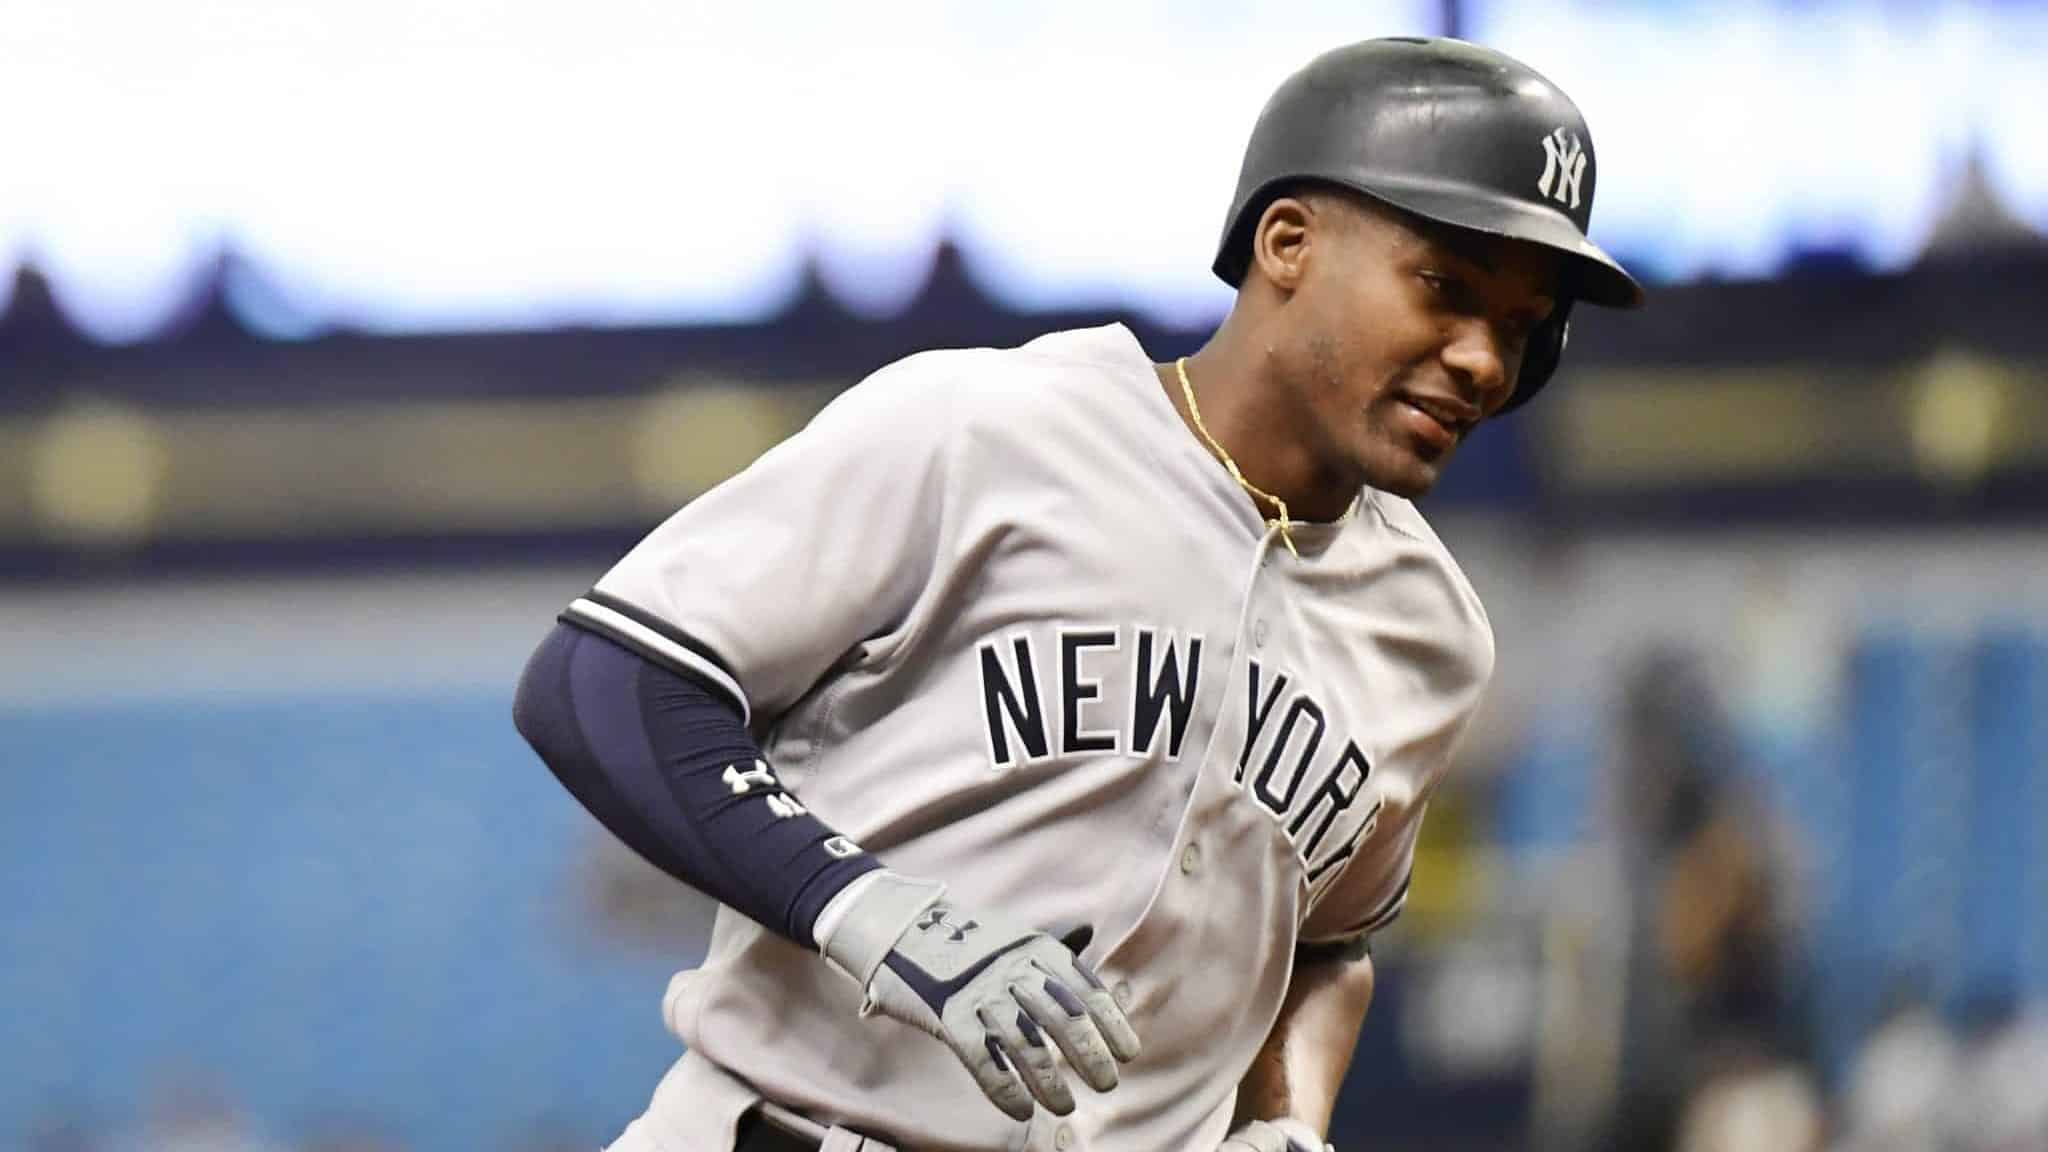 ST PETERSBURG, FL - SEPTEMBER 27: Miguel Andujar #41 of the New York Yankees hits a three-run homer in the first inning against the Tampa Bay Rays on September 27, 2018 at Tropicana Field in St Petersburg, Florida.